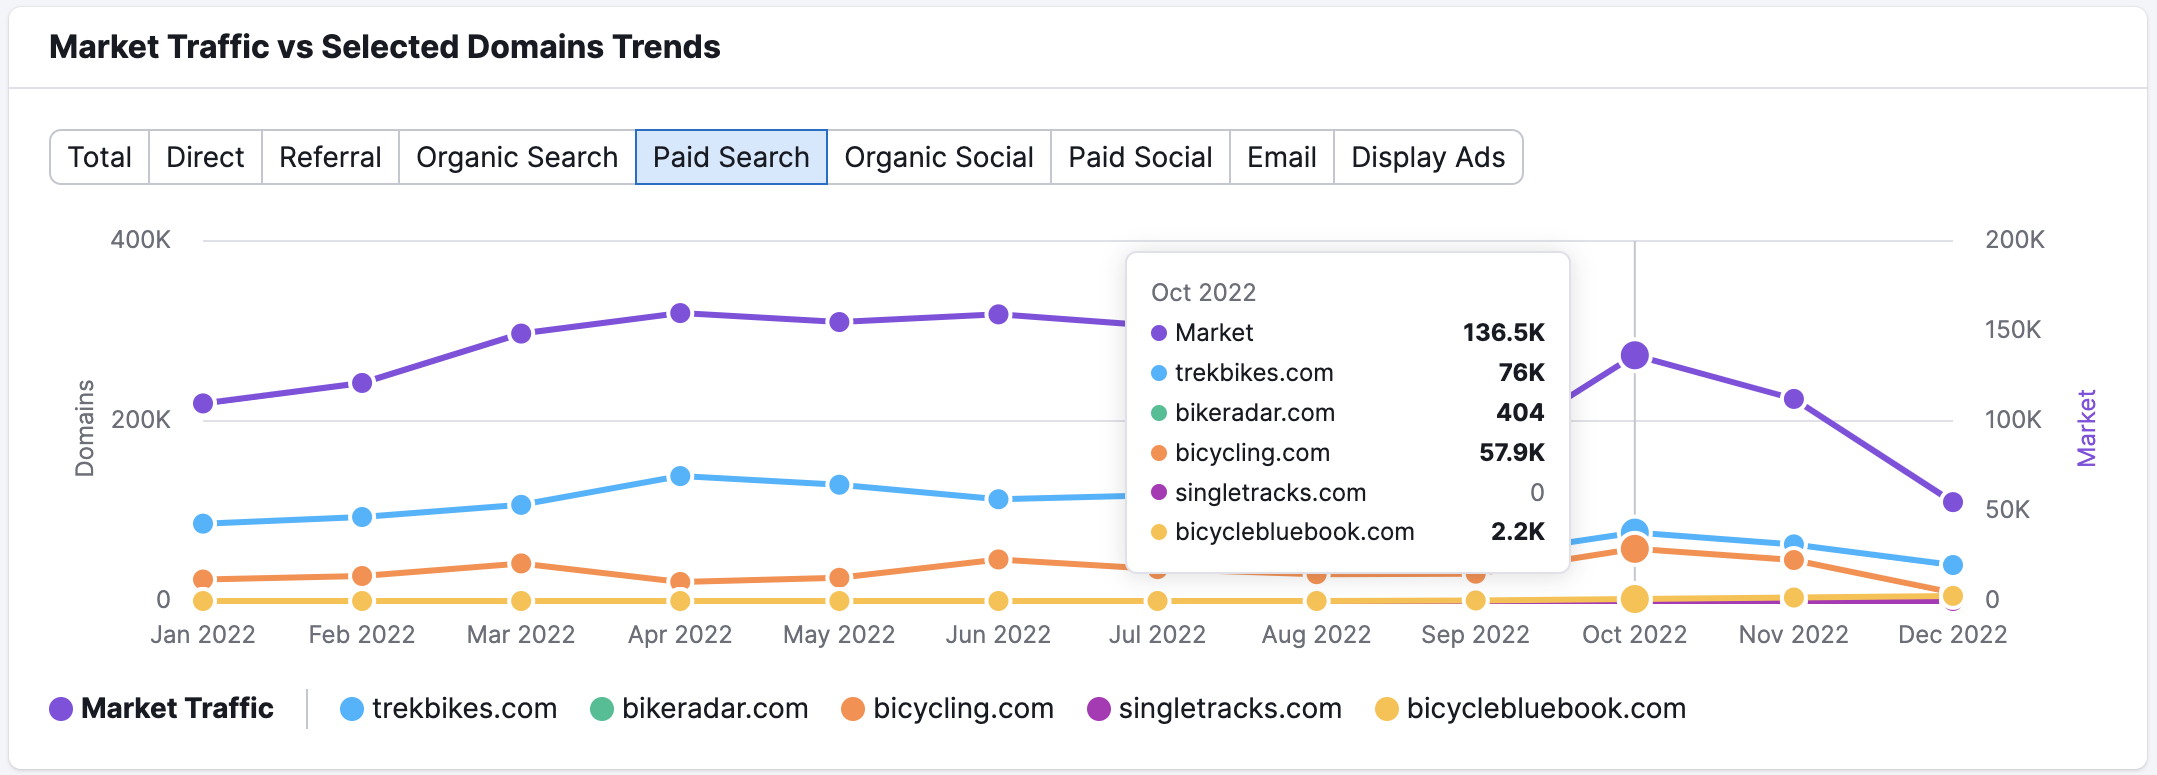 Switching between traffic types on Market Traffic vs Selected Domains Trends allows checking different dynamics.